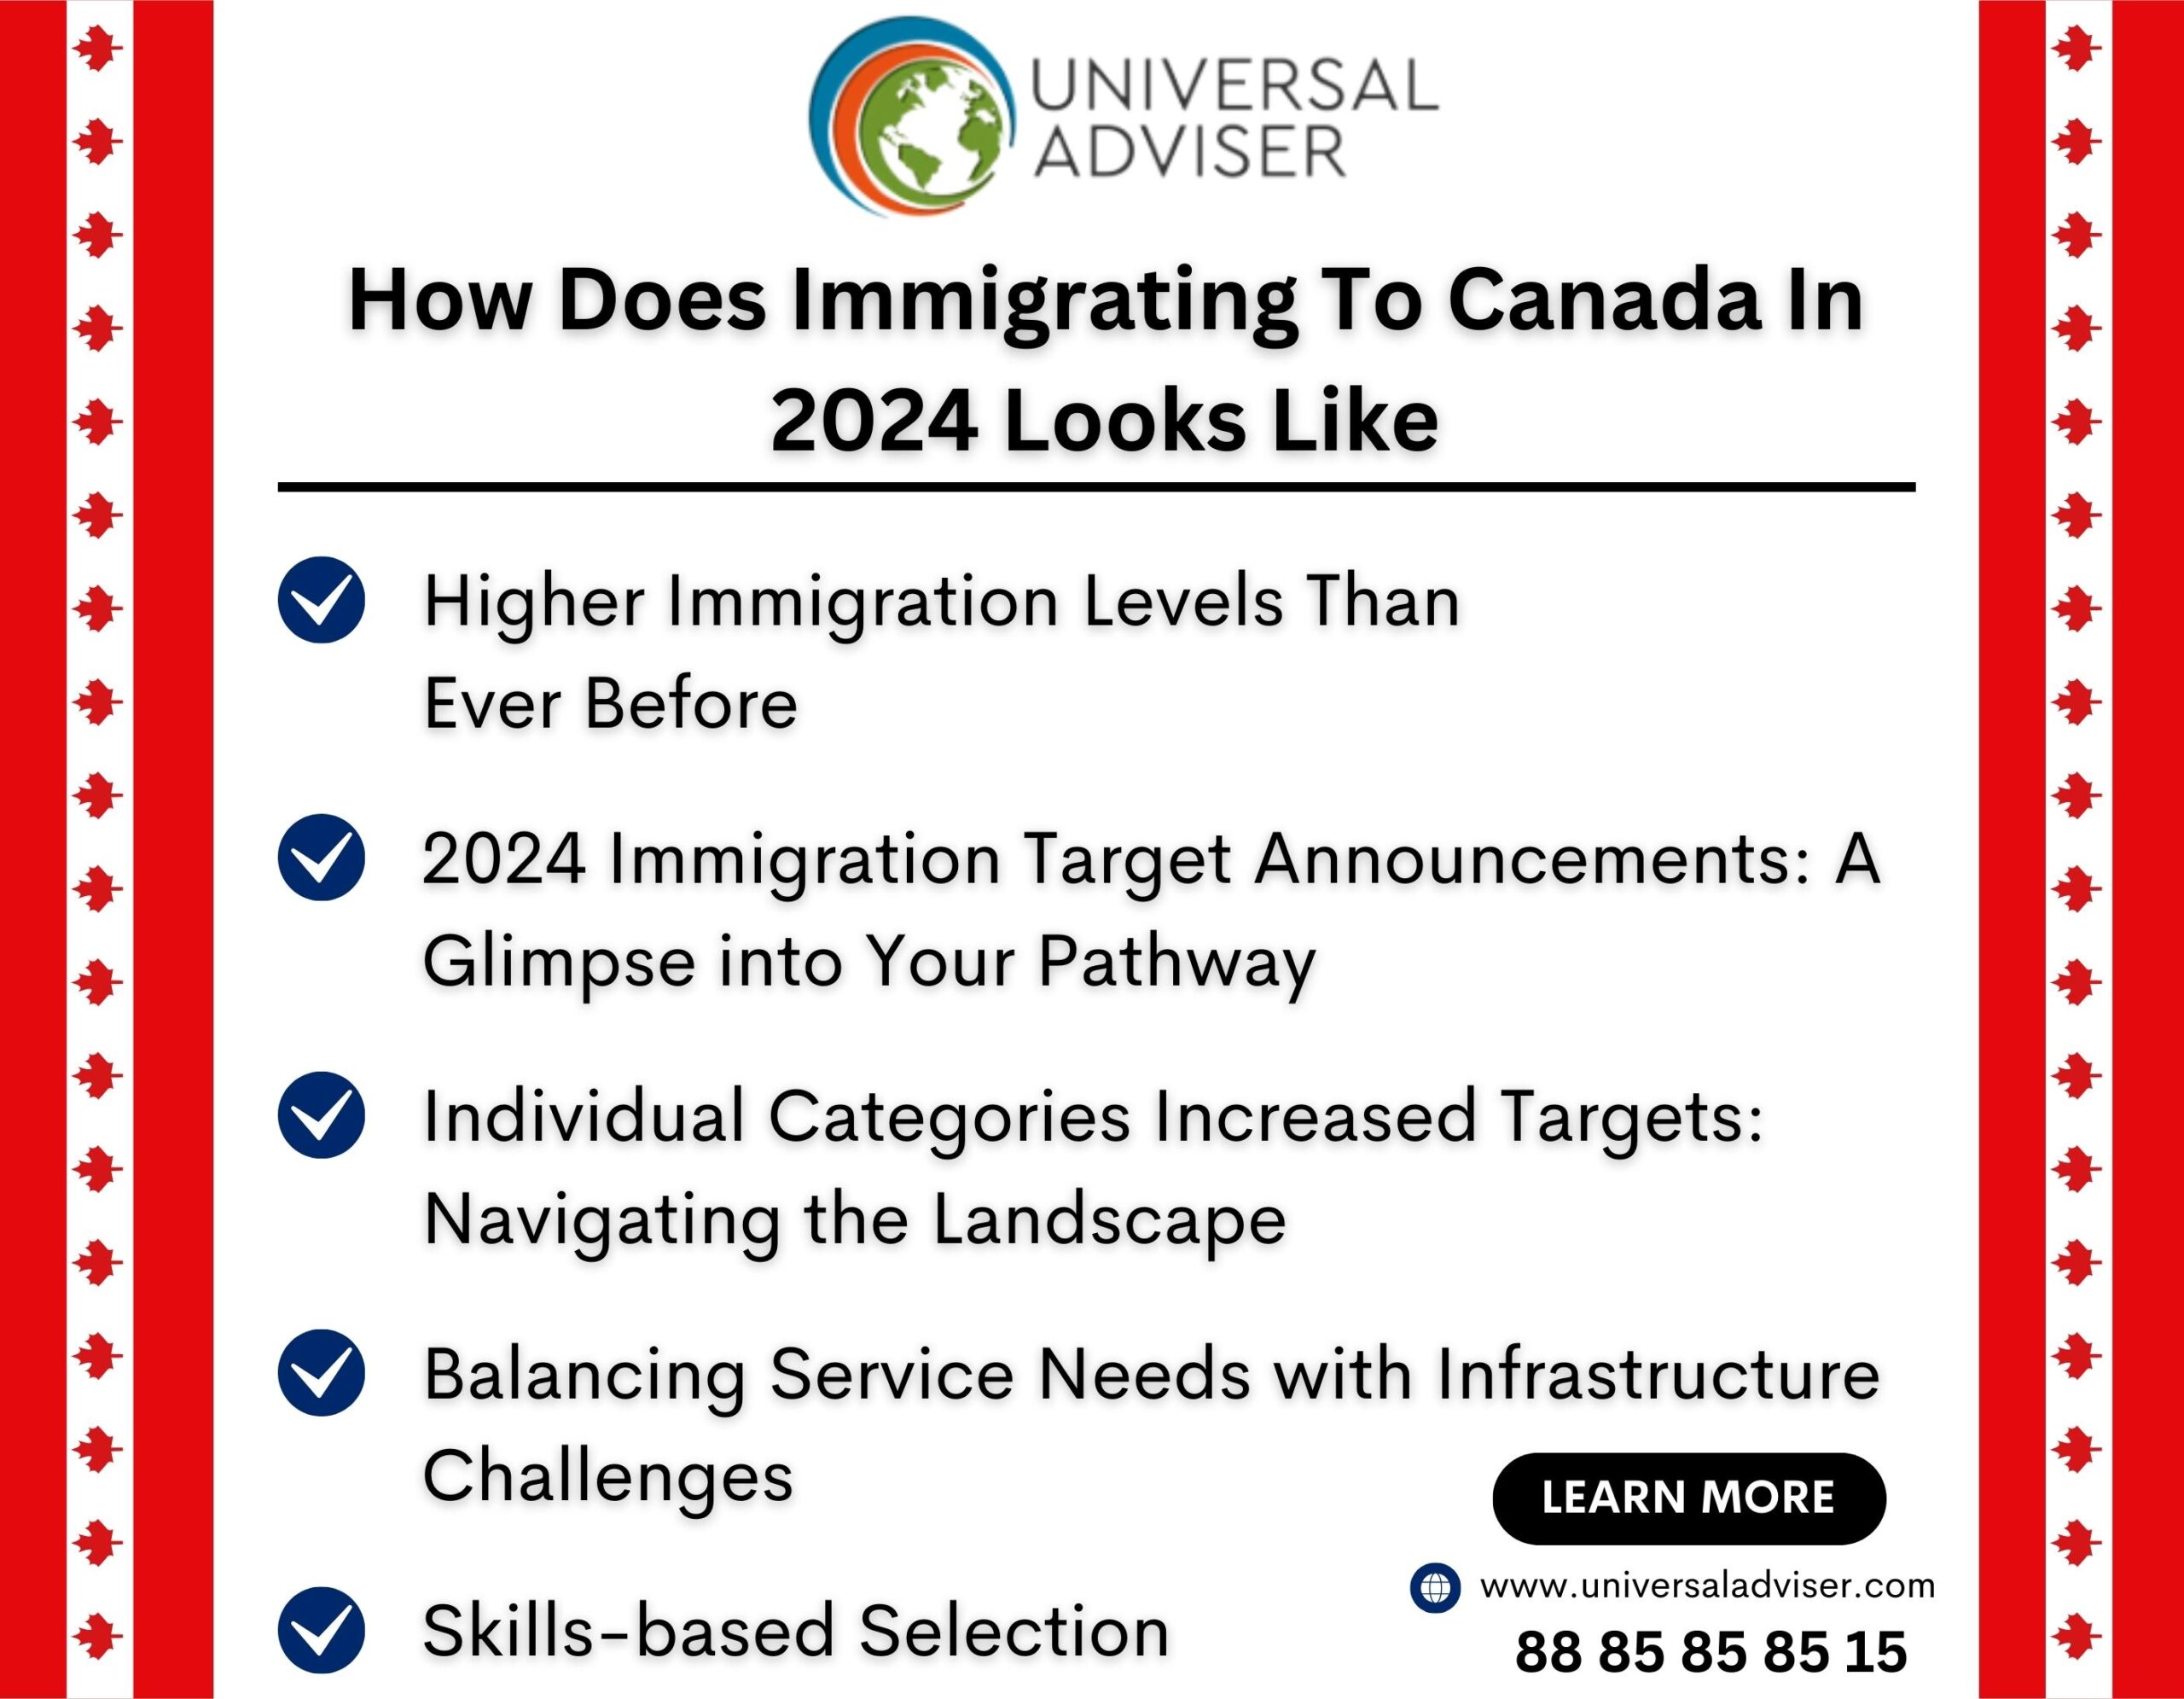 Moving to Canada, How Does Immigrating To Canada In 2024 Looks Like